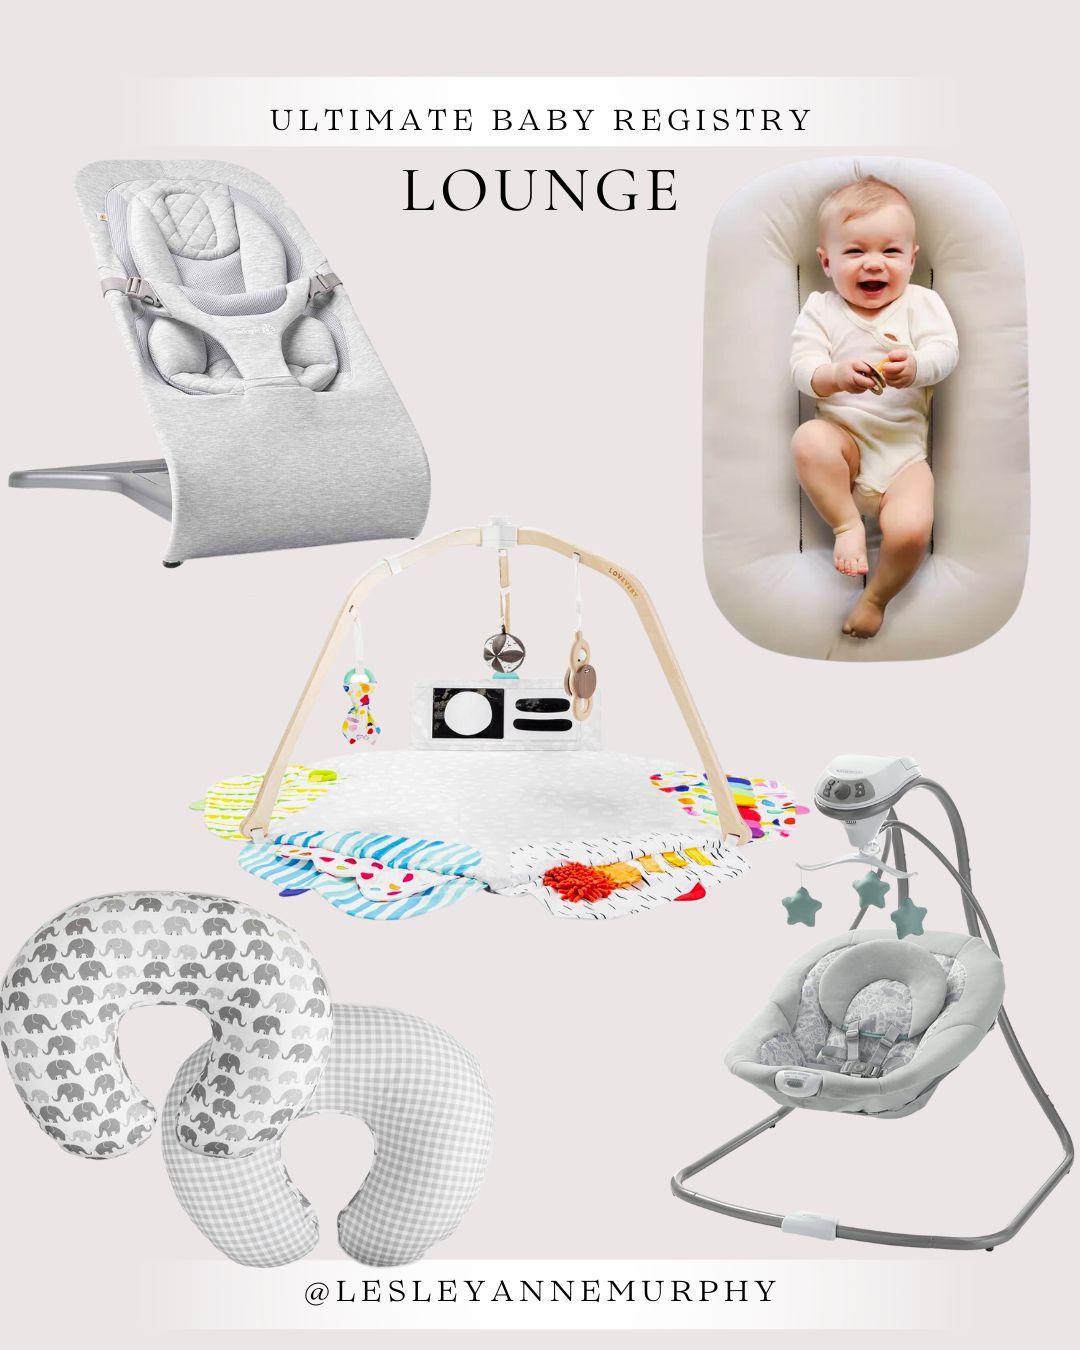 Boppy, Swing, play mat and more newborn lounge accessories pictured